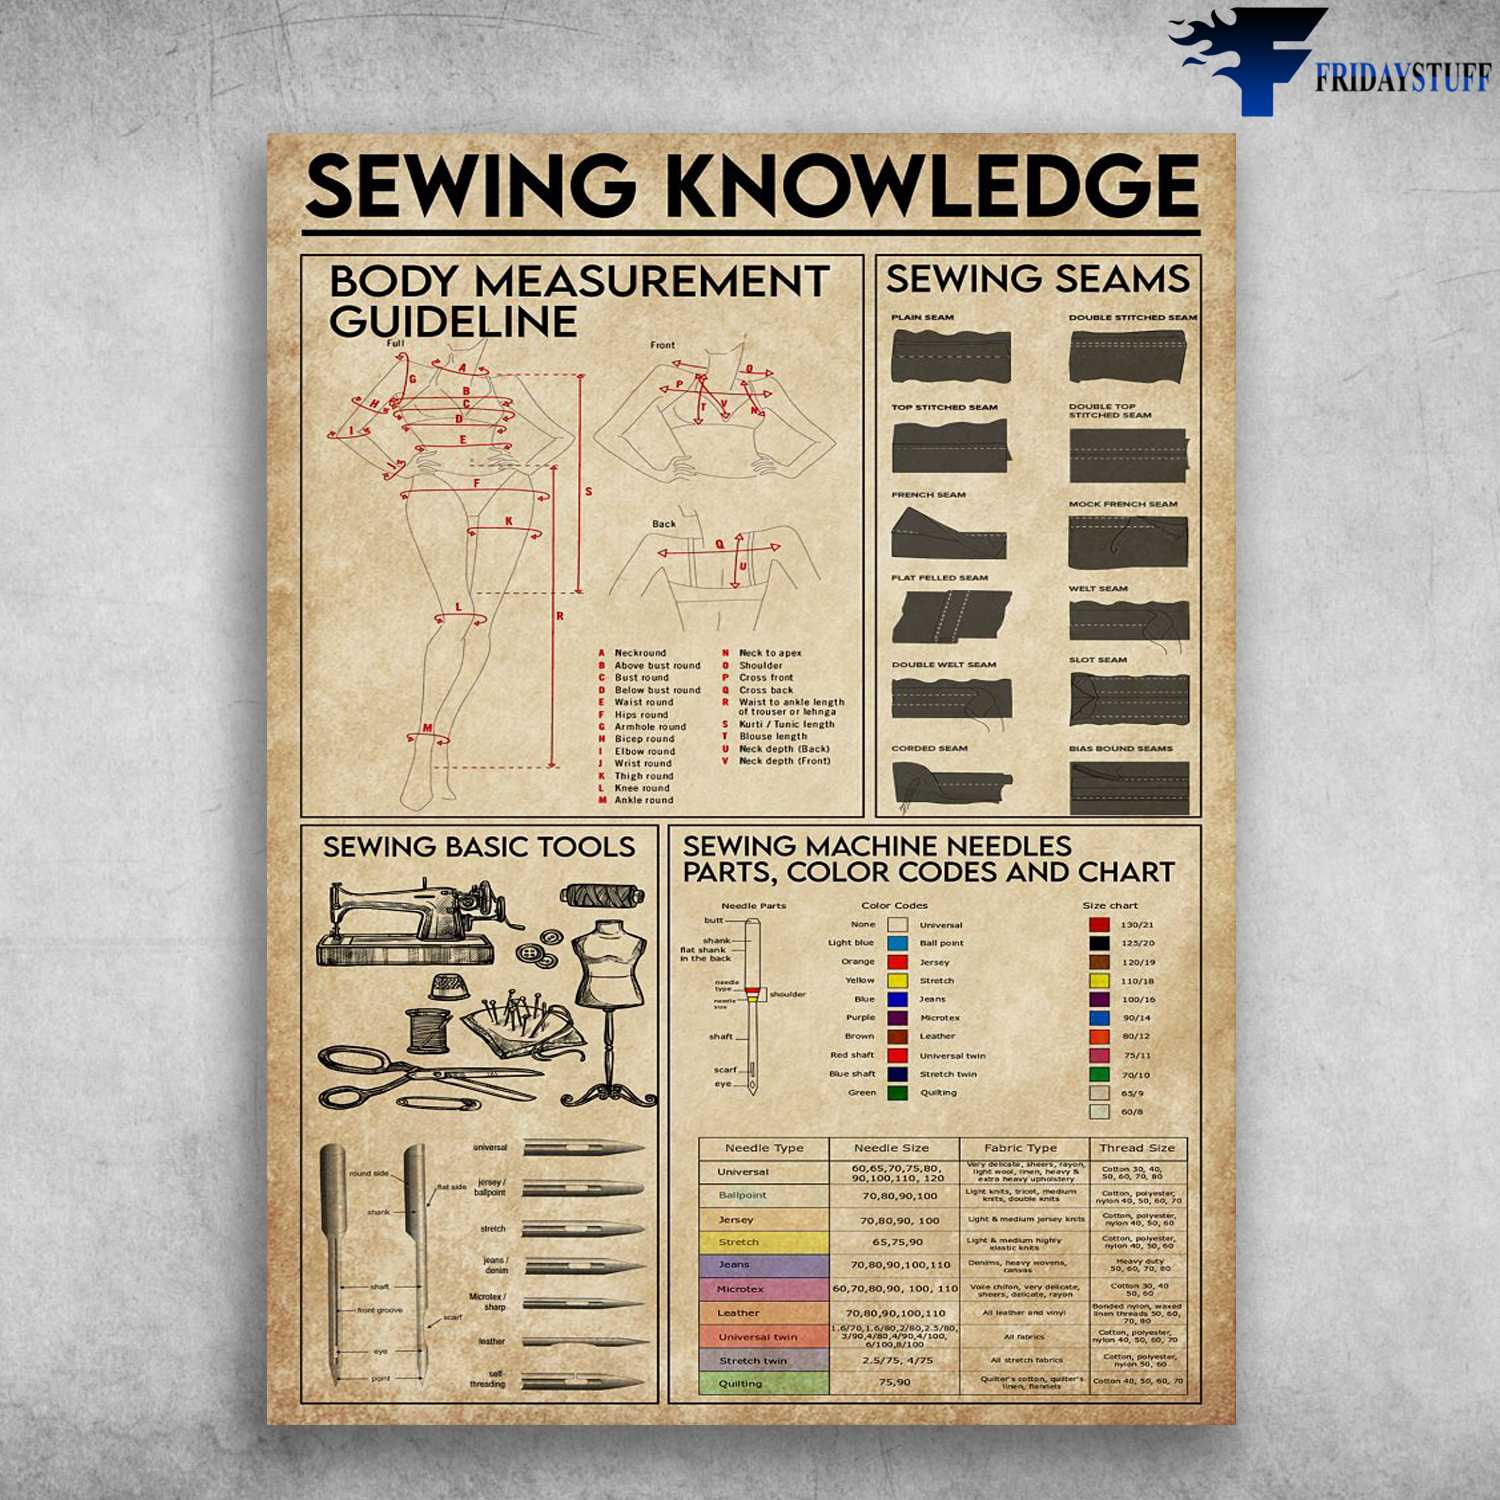 Sewing Knowledge, Sewing Poster - Body Measurement Guideline, Sewing Seams, Sewing Basic Tools, Sewing Machine Needles Part, Color Codes And Chart